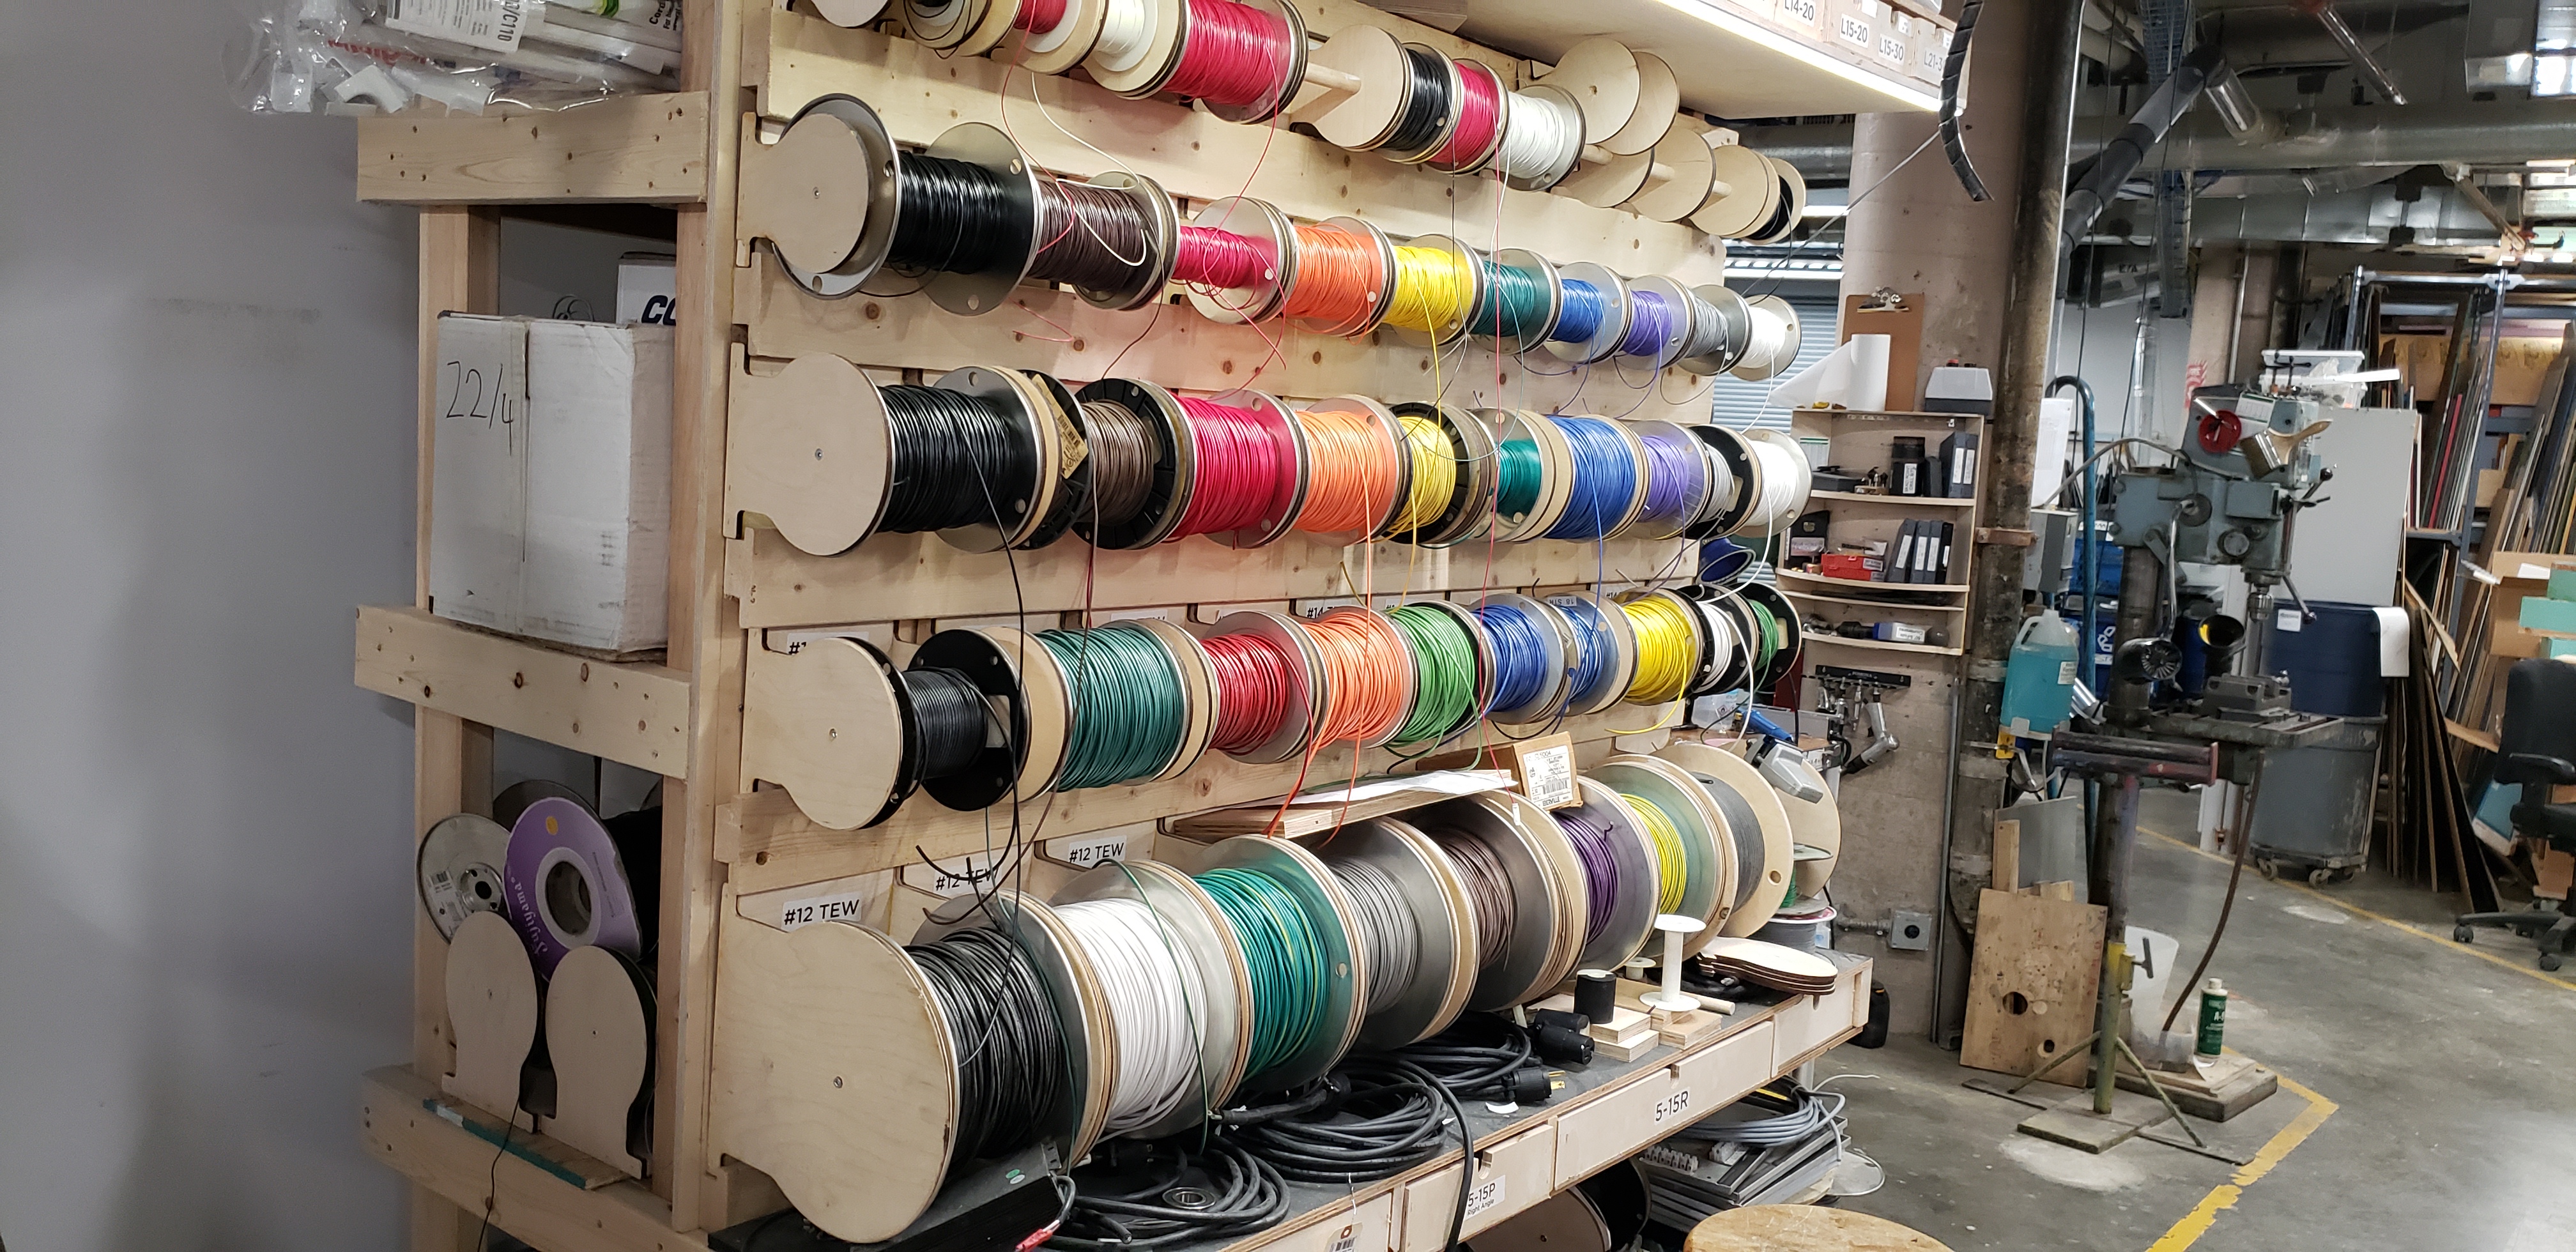 Wire spool rack idea - Space and infrastructure - VHS Talk